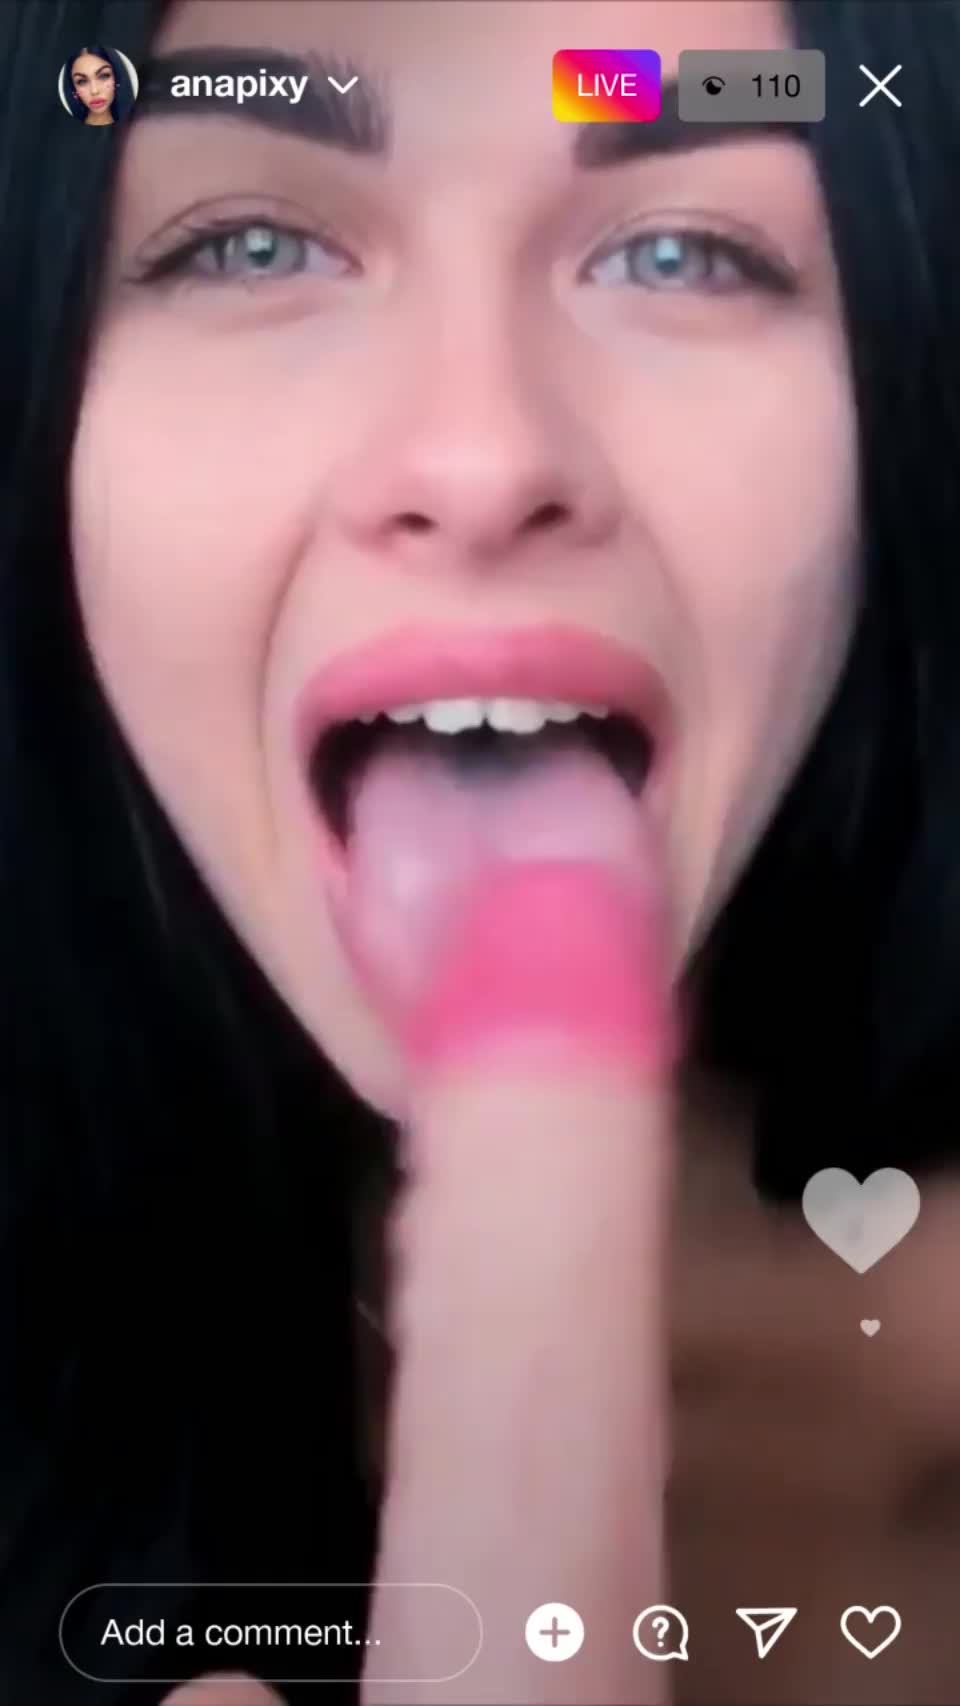 Insta Leak - Would you slide your cock in her? : video clip